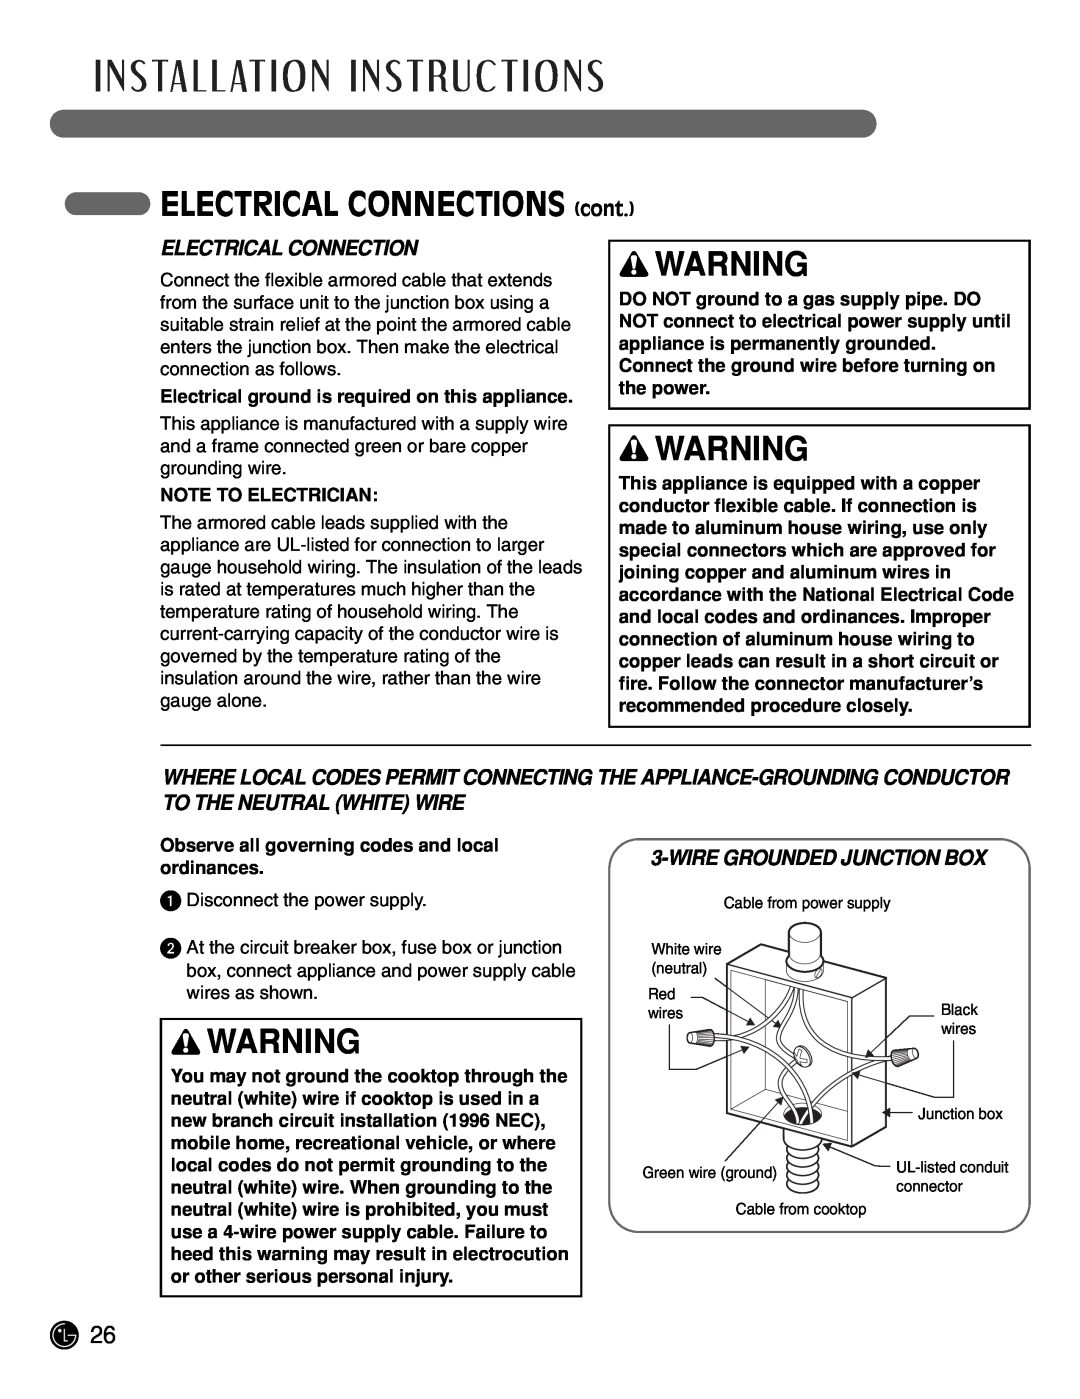 LG Electronics LCE3681ST, LCE3081ST manual ELECTRICAL CONNECTIONS cont, Electrical Connection, Wire Grounded Junction Box 